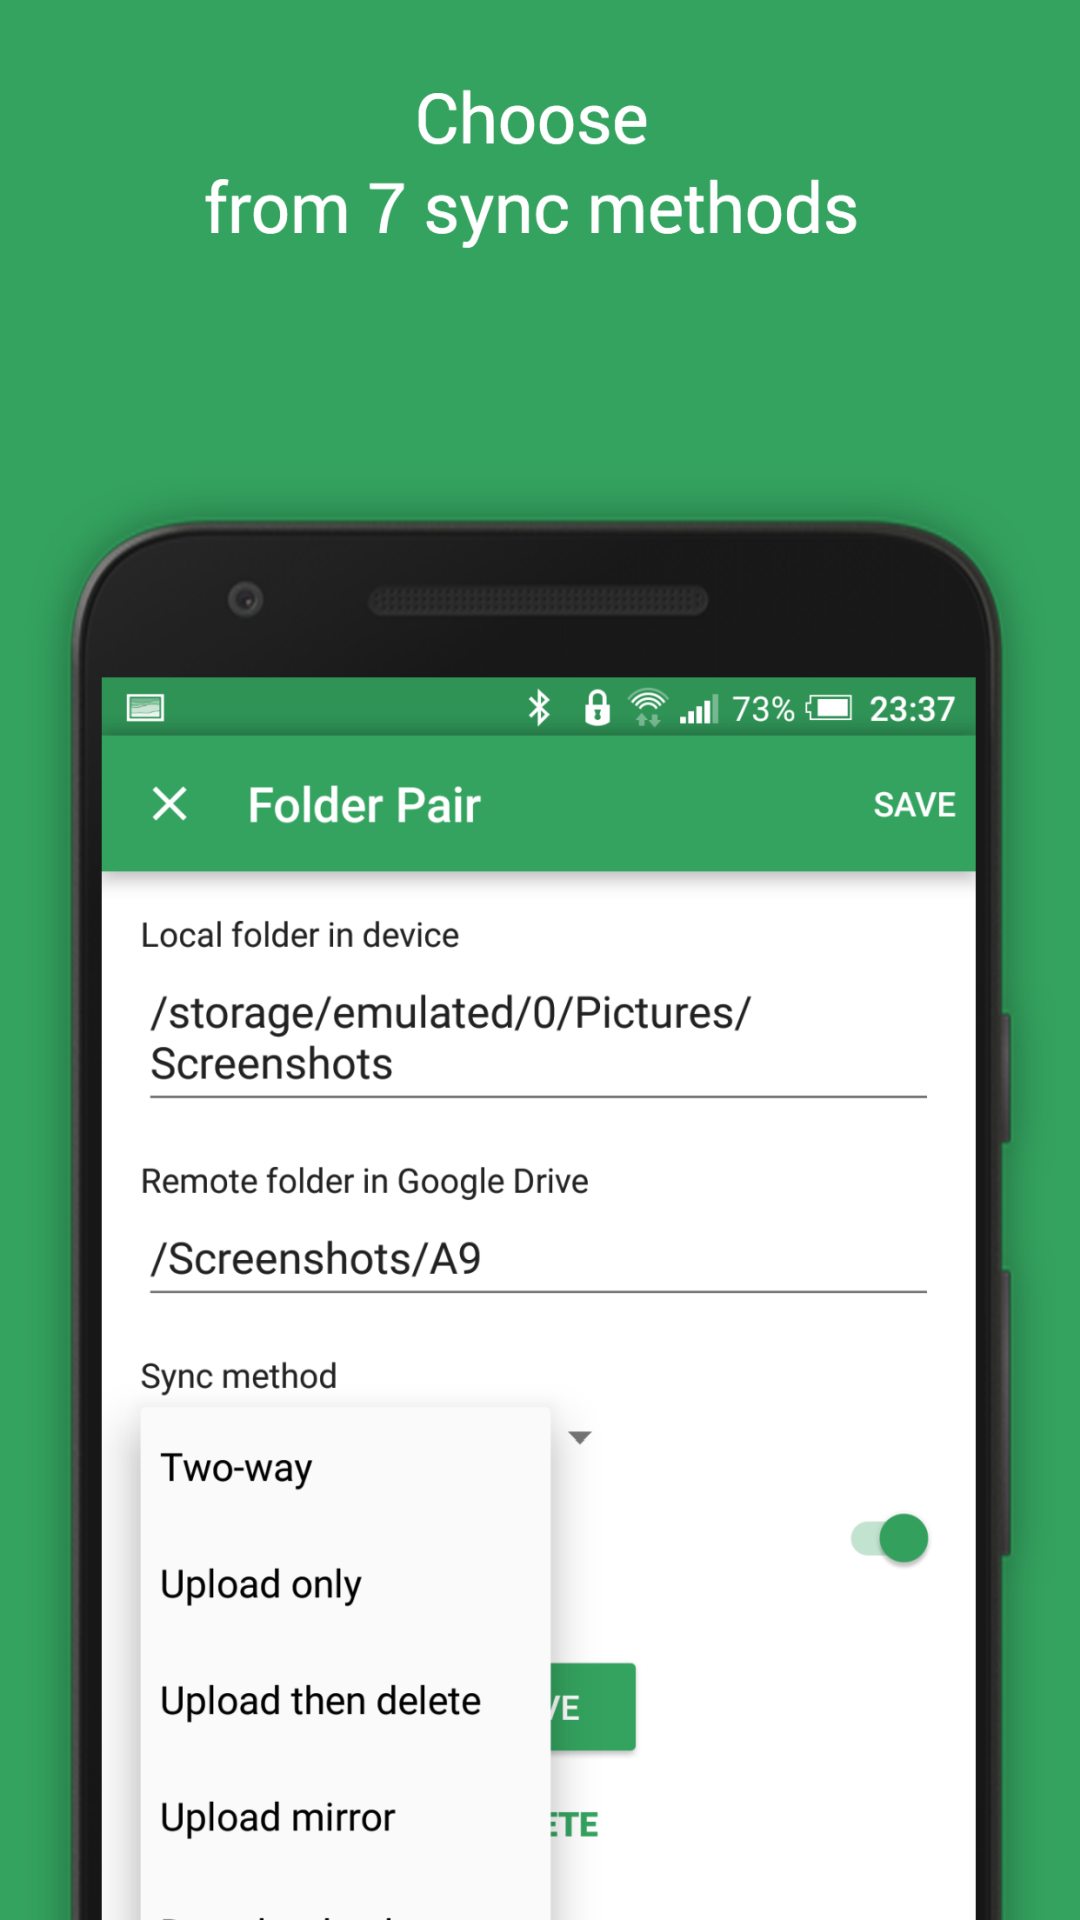 google drive apk download for android 4.2.2